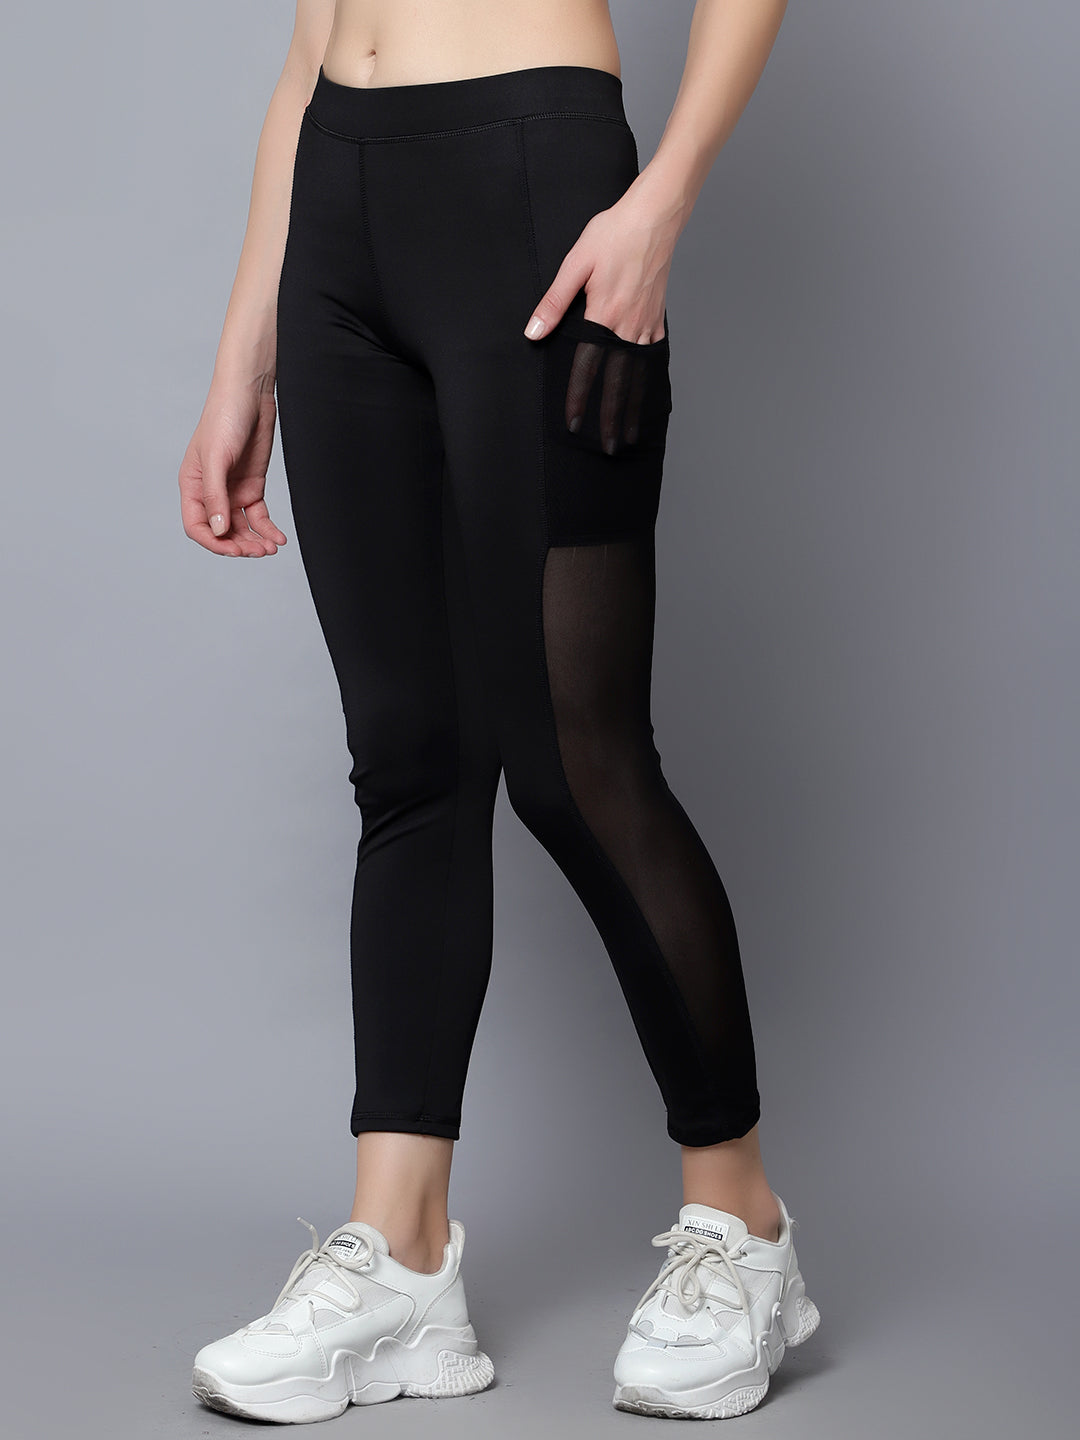 Women's Black Solid Gym Tights with Mesh